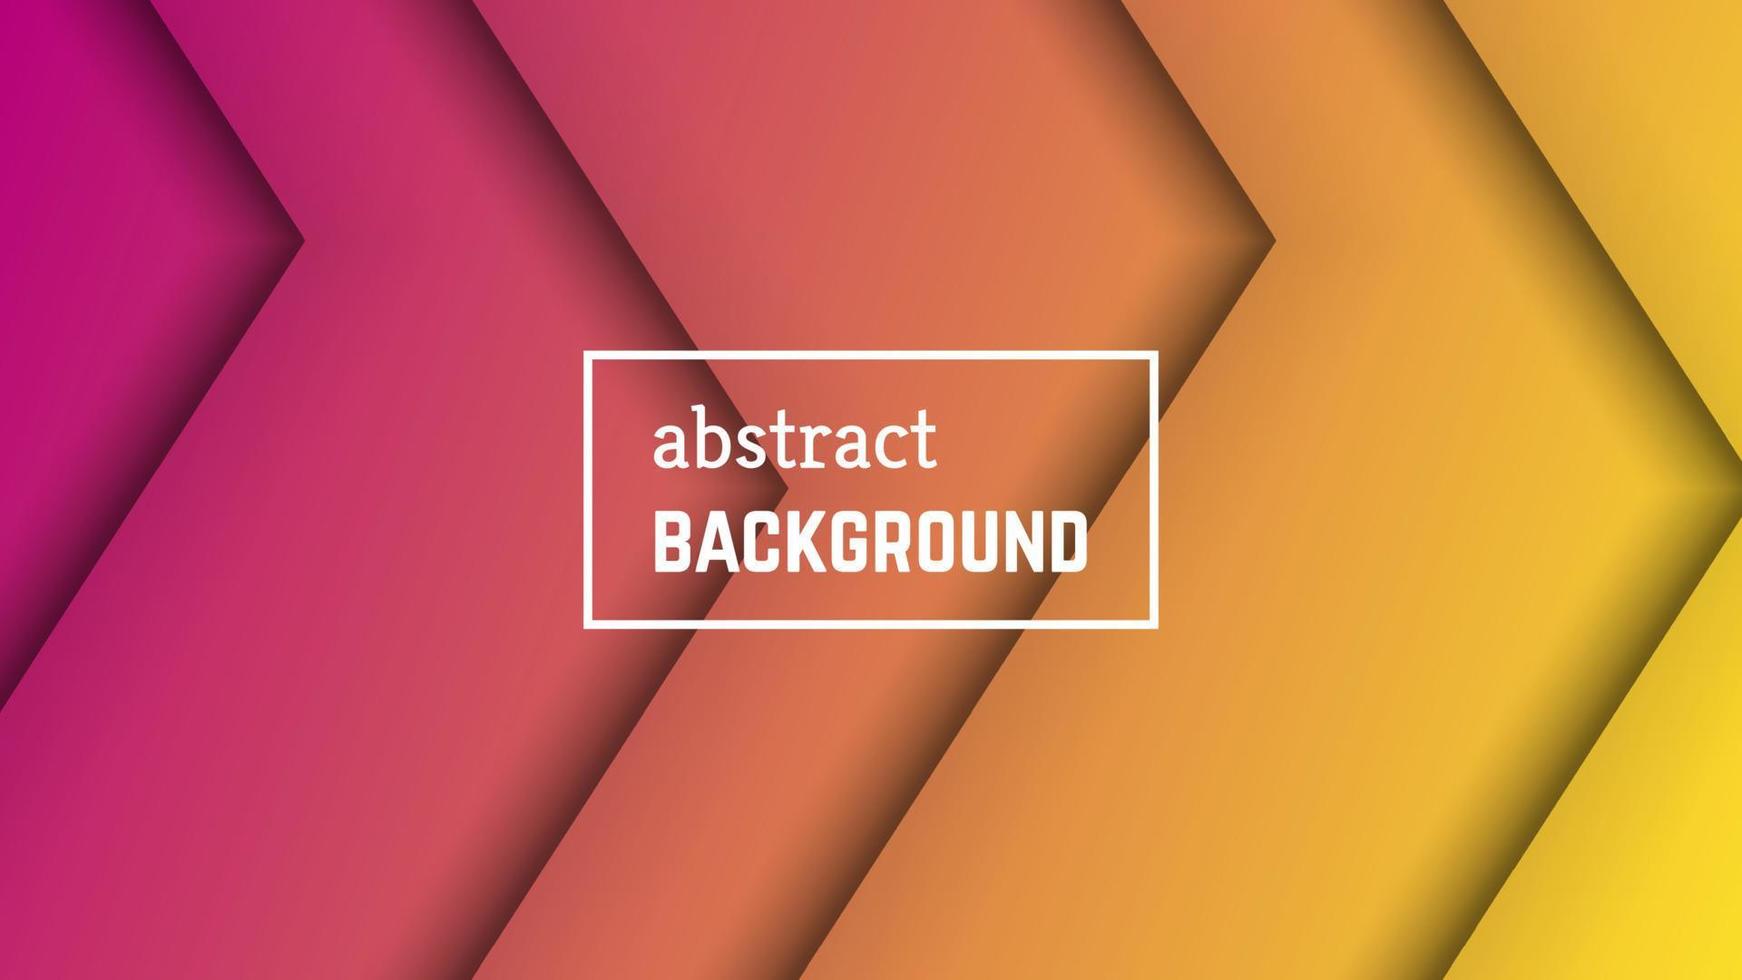 Abstract minimal line geometric background. Orange line layer shape for banner, templates, cards. Vector illustration.